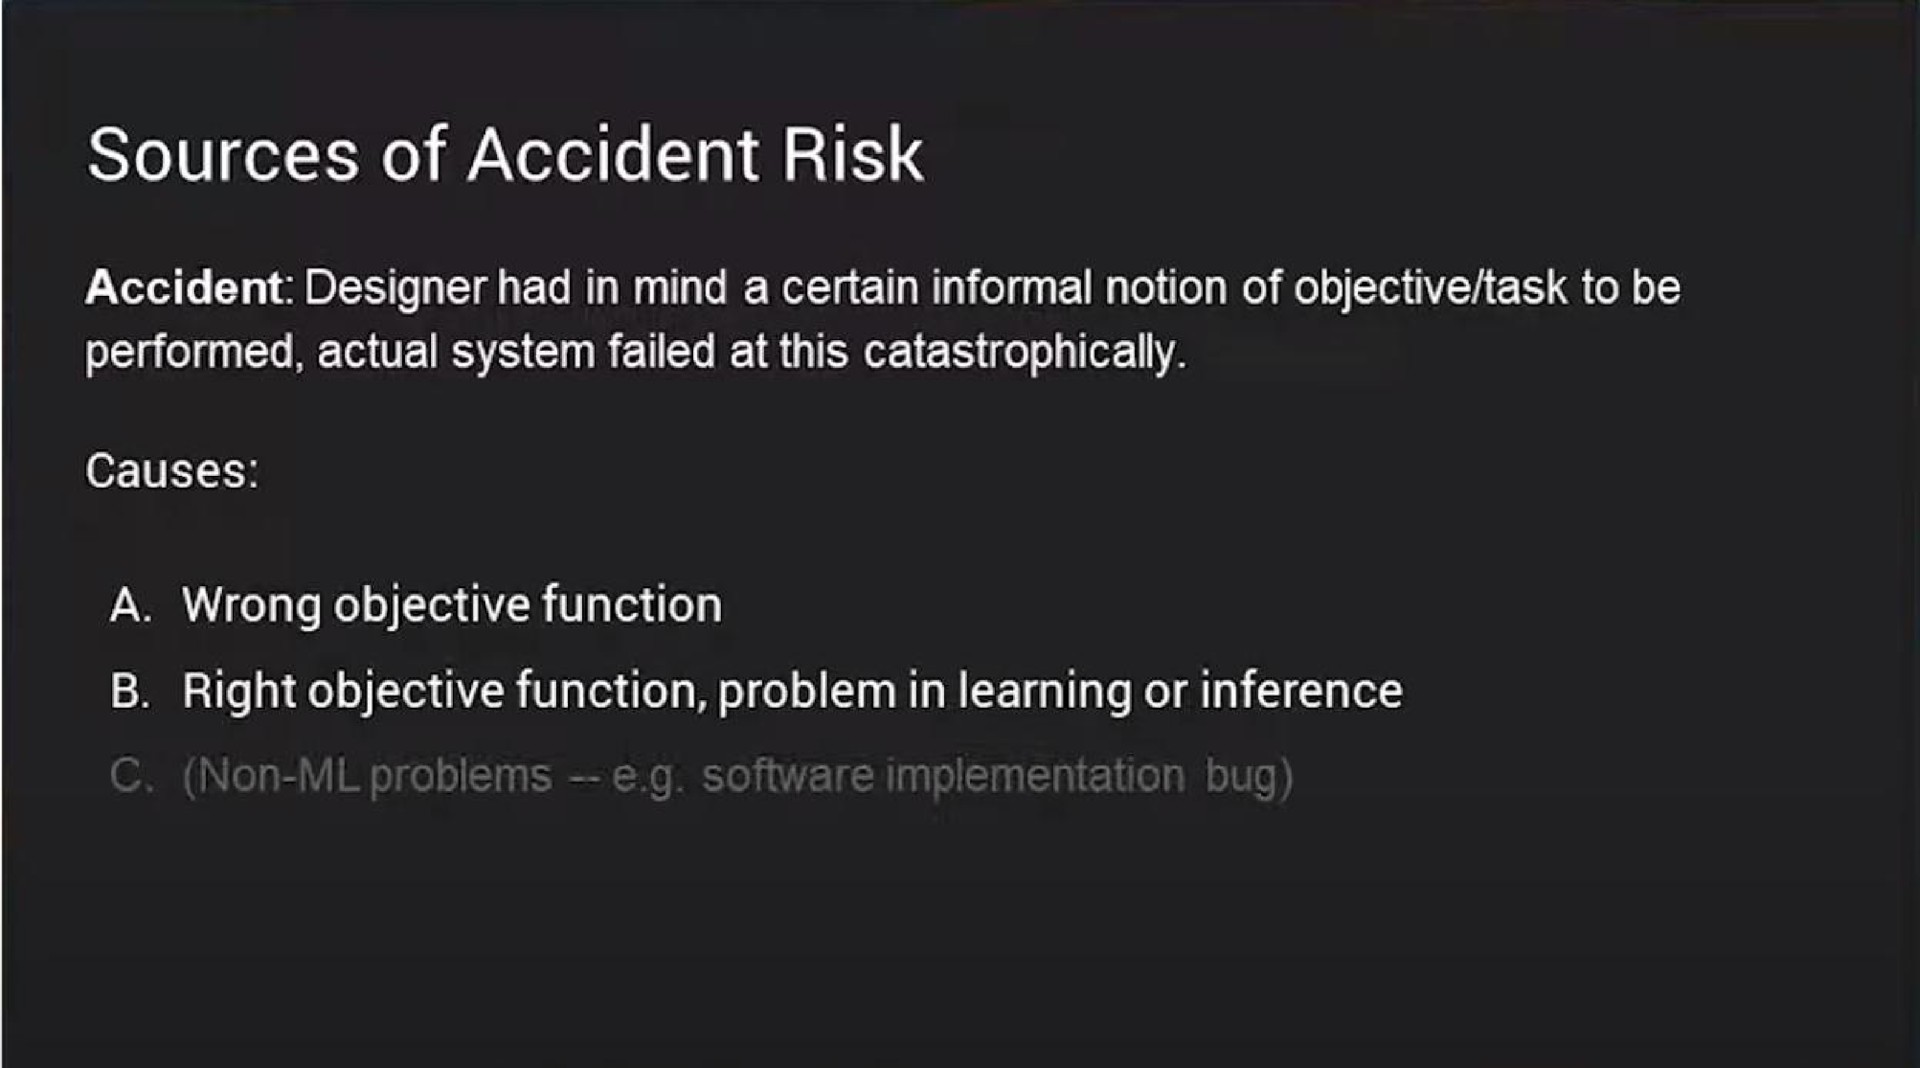 sources of accident risk | OpenAI